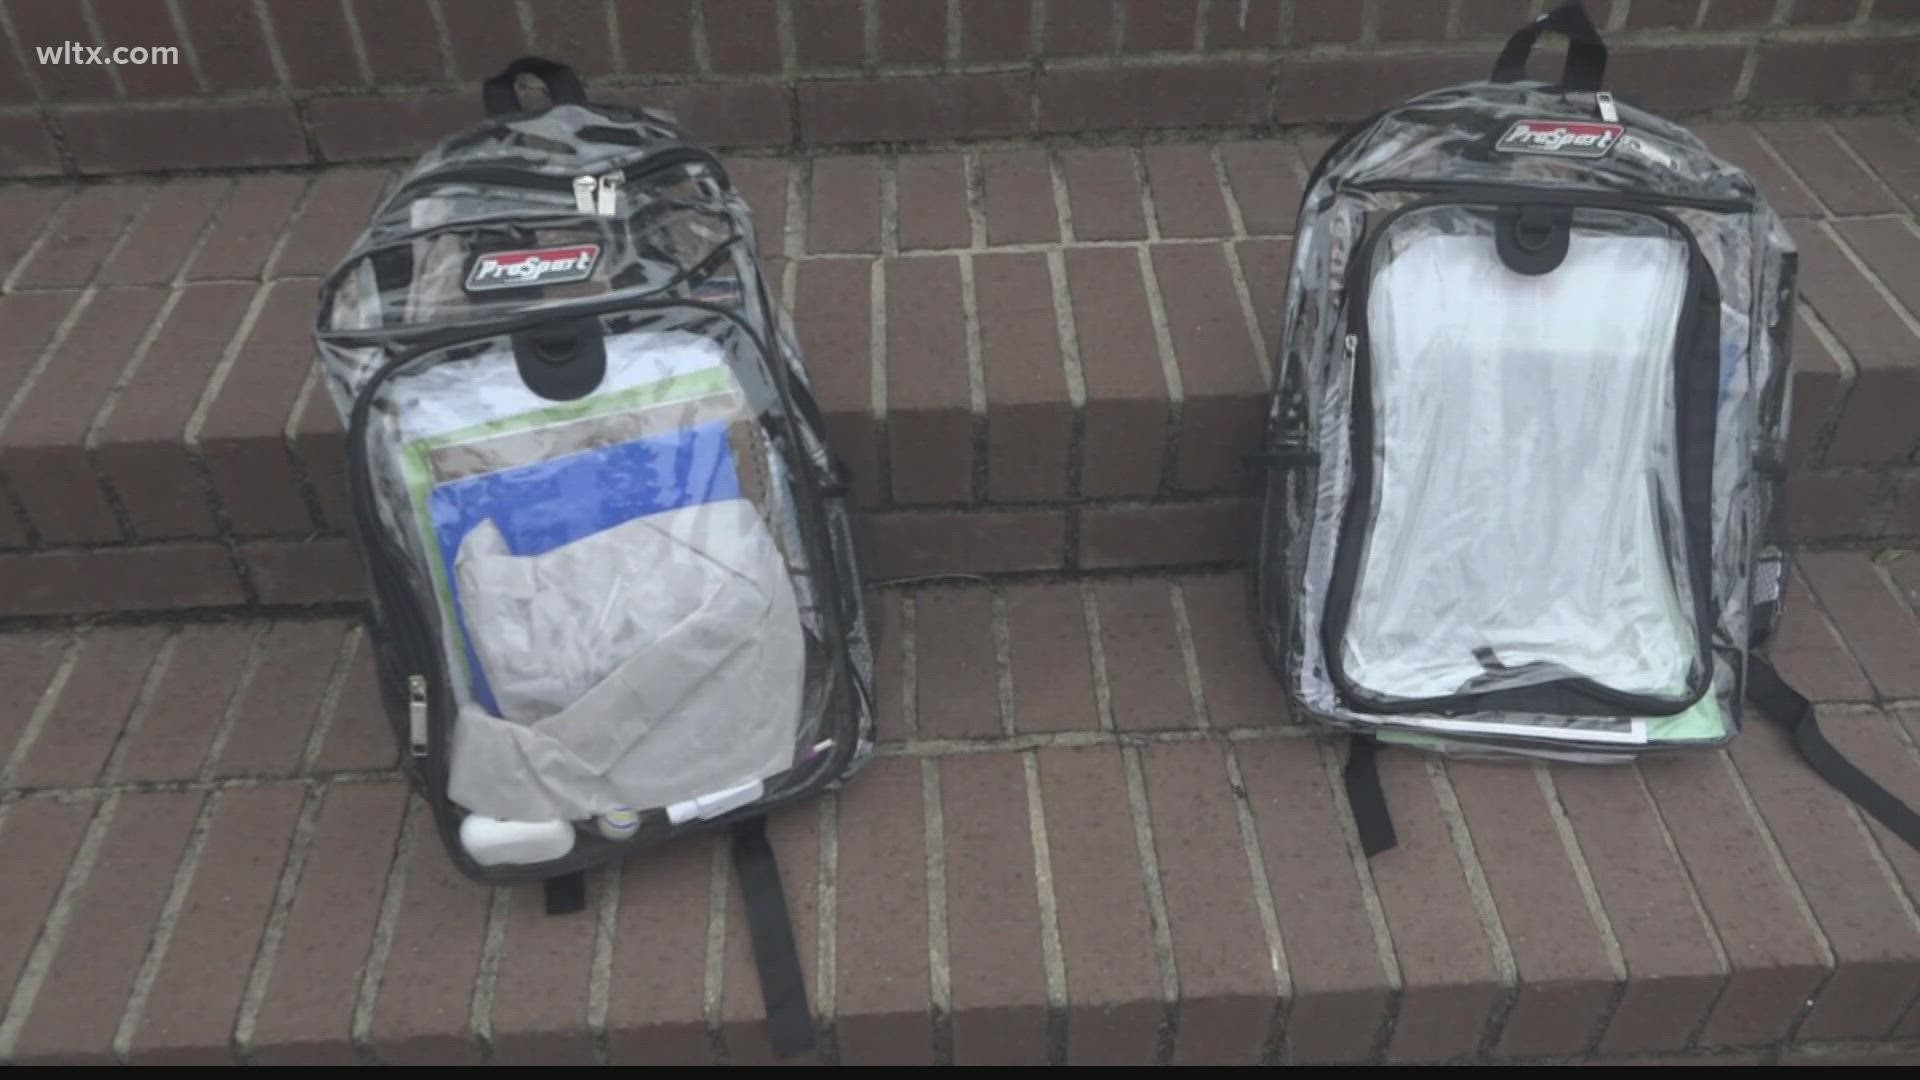 Students in middle and high schools will have to carry a clear backpack or purse while in school.